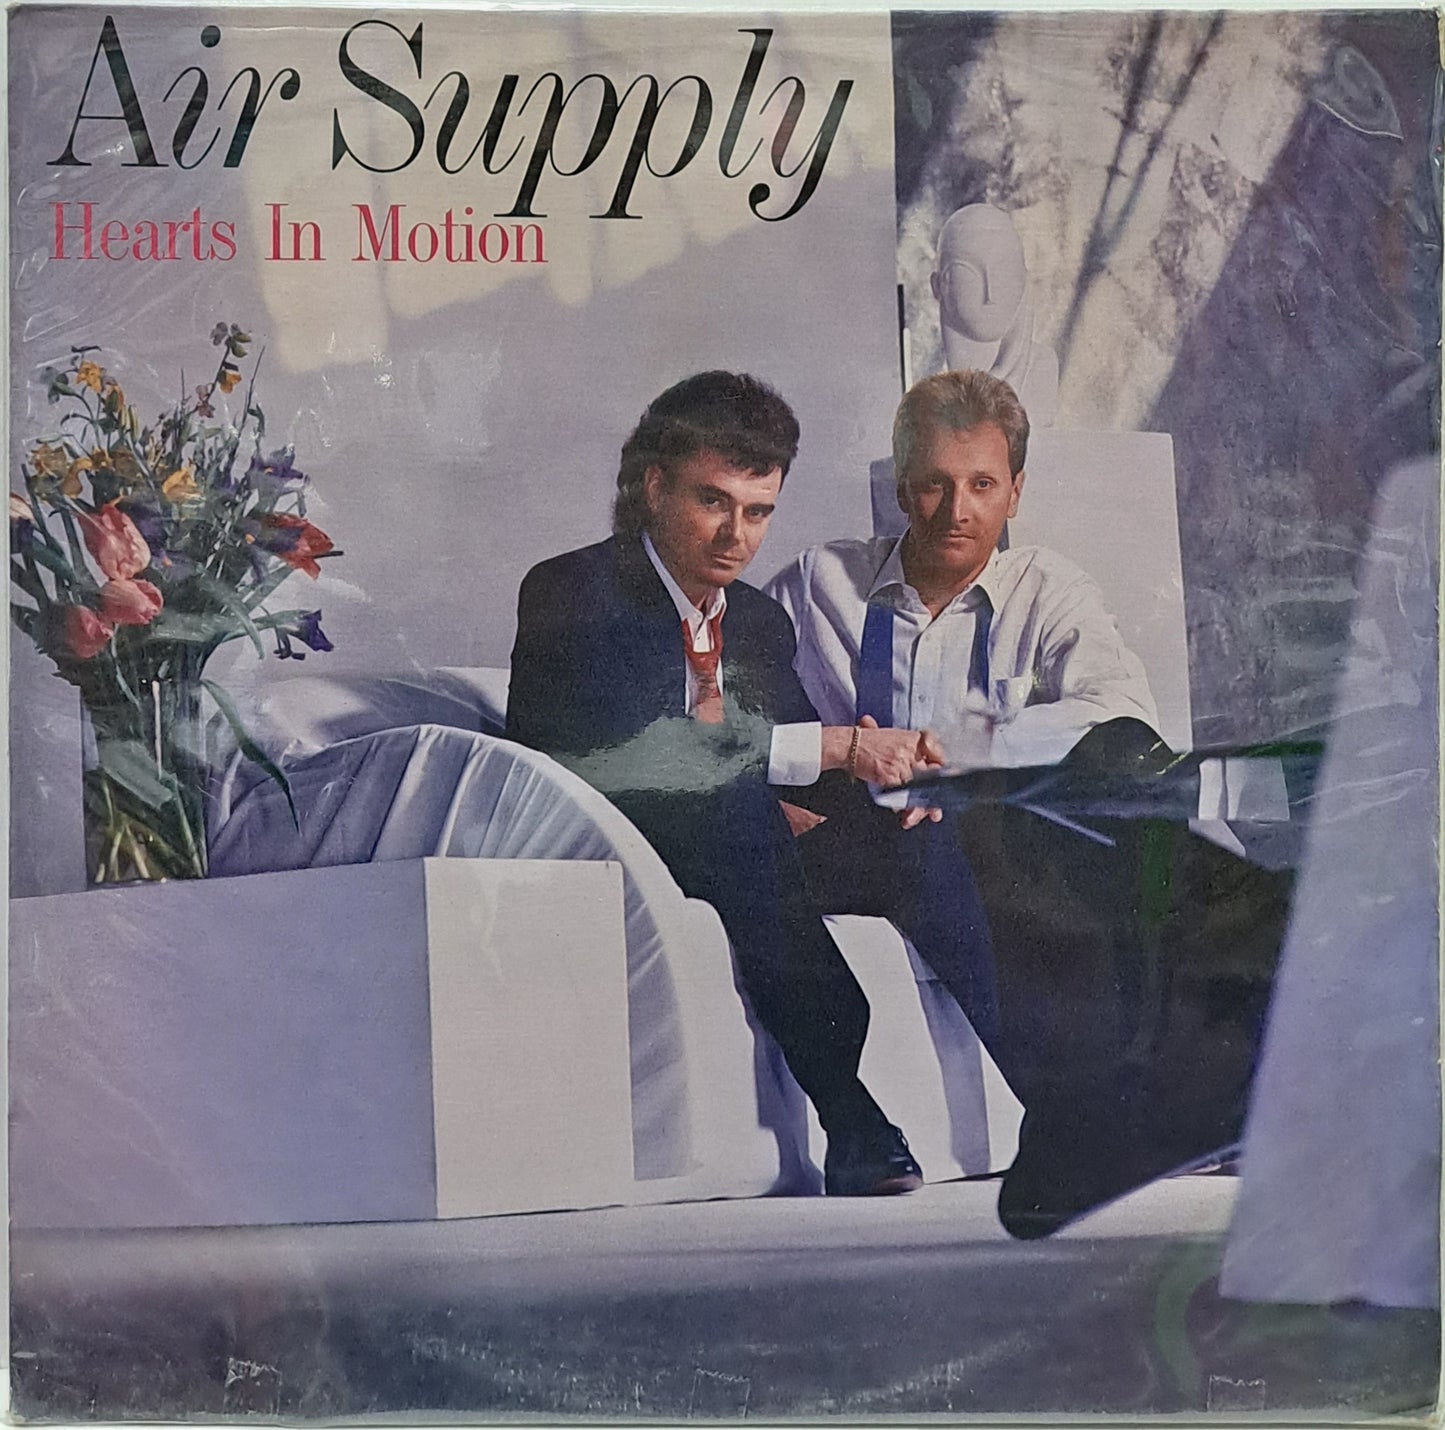 AIR SUPPLY - HEARTS IN MOTION  LP